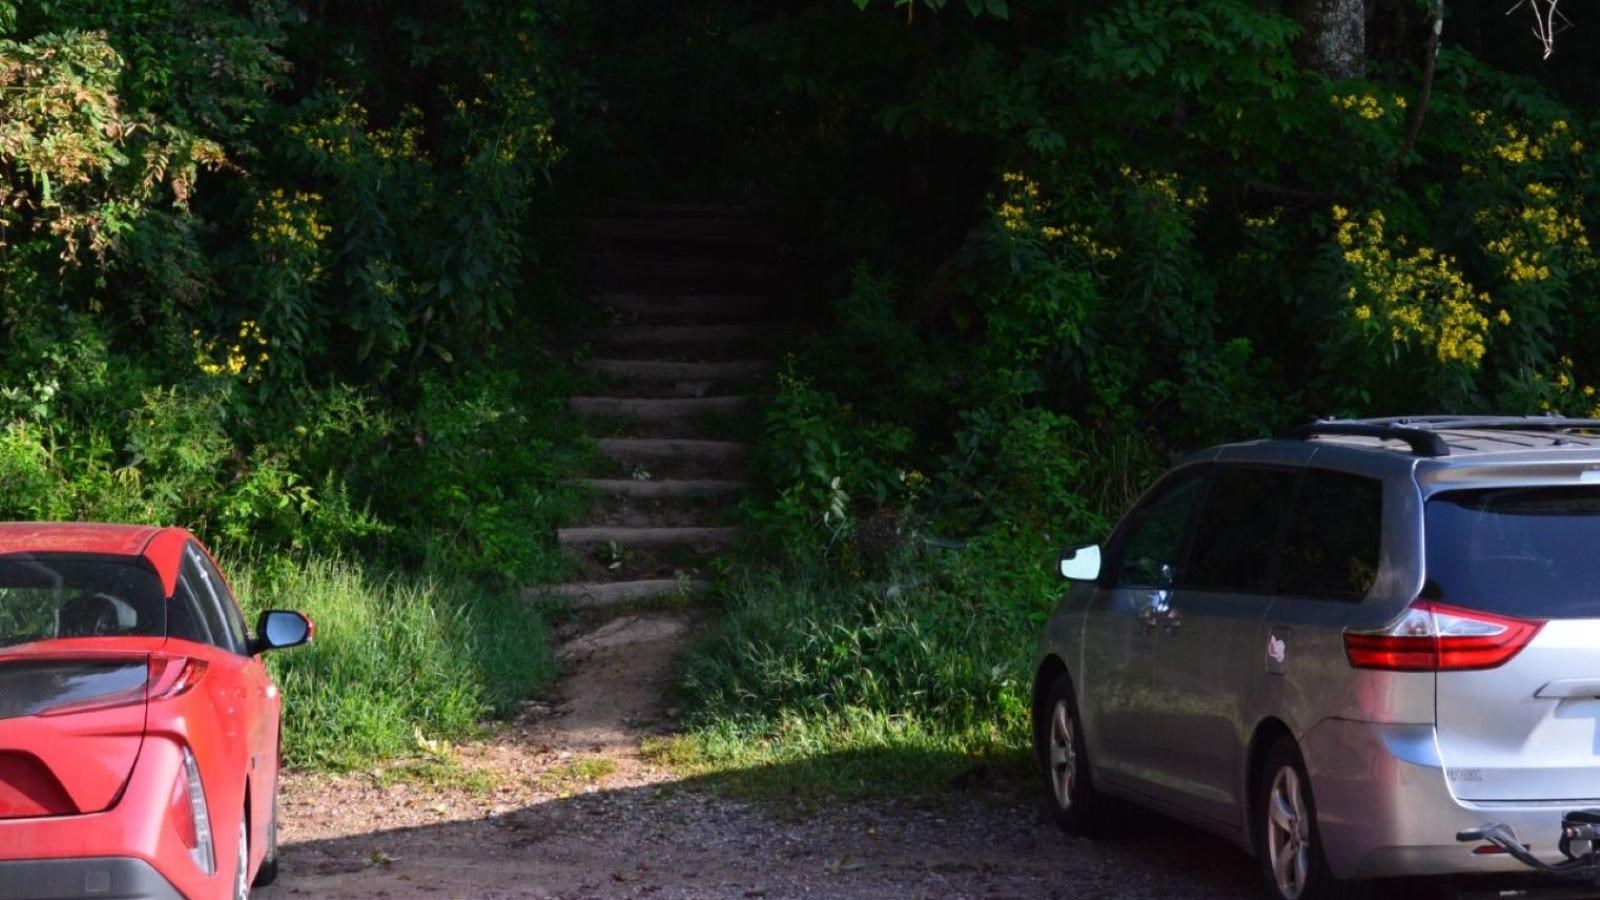 Cars parked in gravel spaces in front of trailhead steps heading into woods